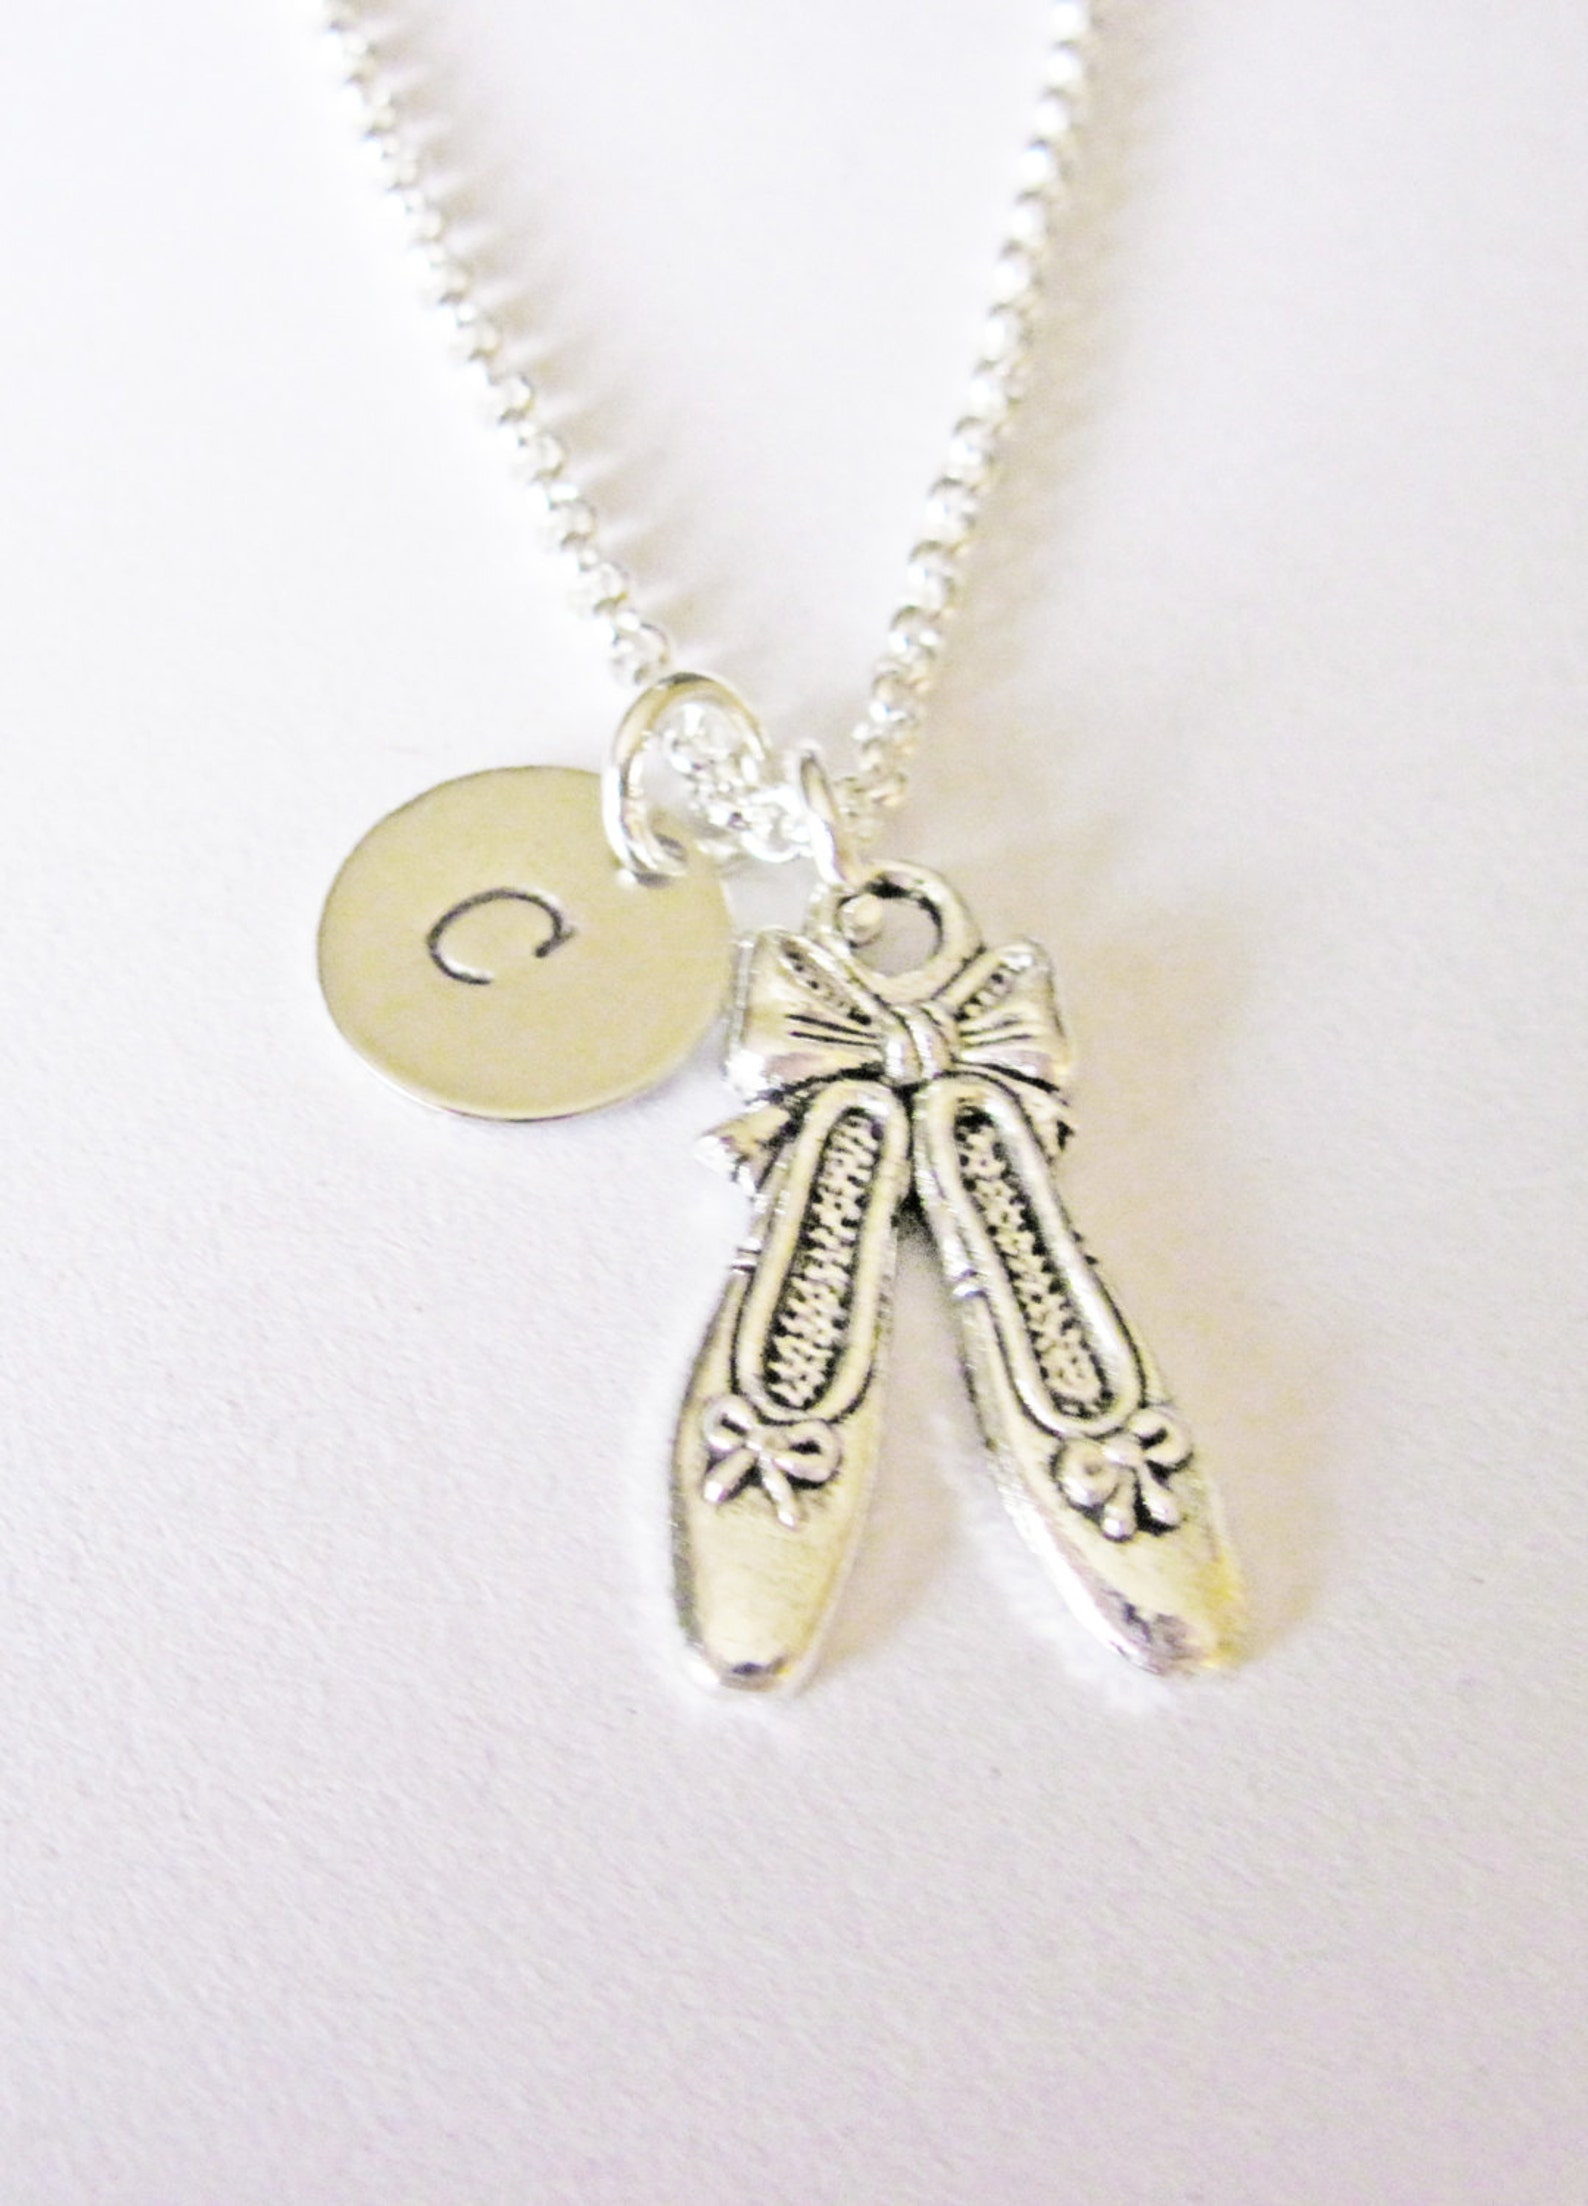 ballet shoes necklace, ballet slippers, initial necklace, initial hand stamped, personalized, antique silver, monogram, ballerin